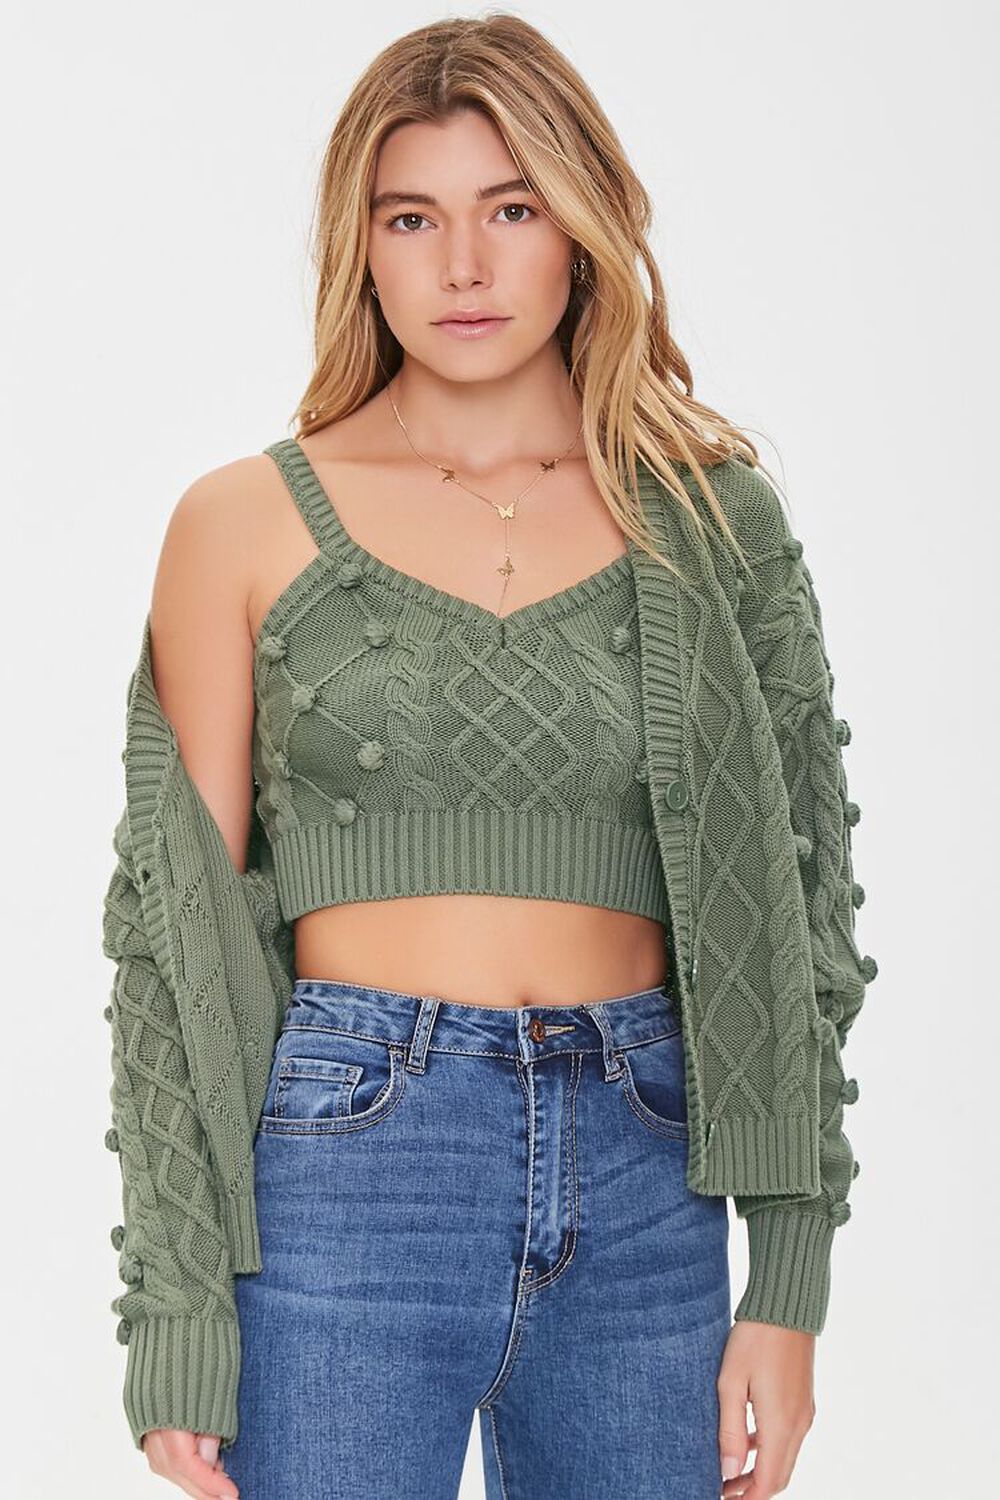 SAGE Ball Cable Knit Cardigan Sweater, image 1